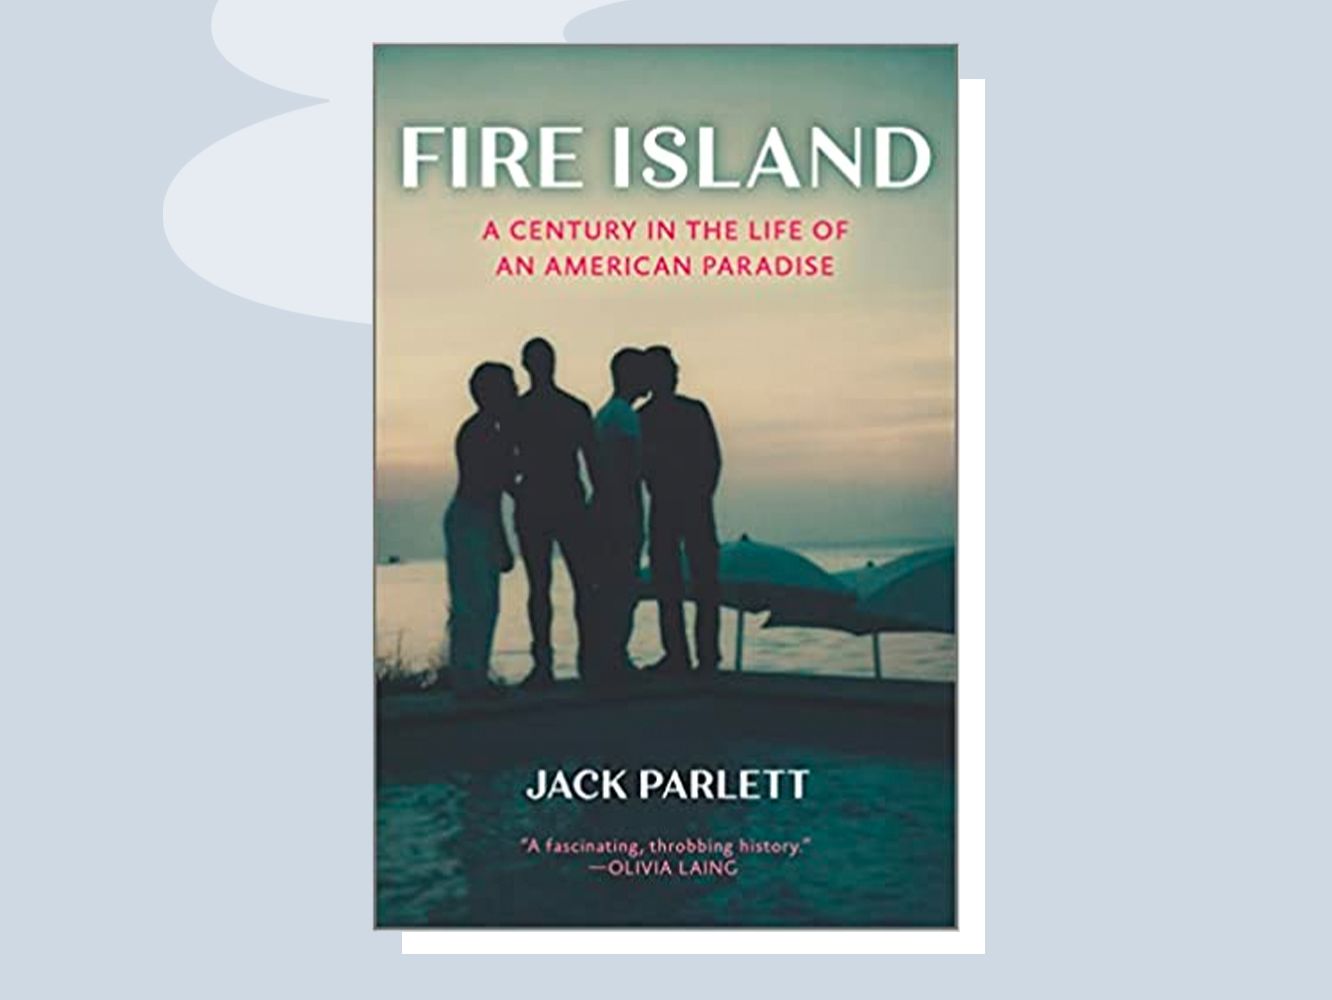 Past,　Island's　Book　Future　Explores　New　Present,　and　A　Fire